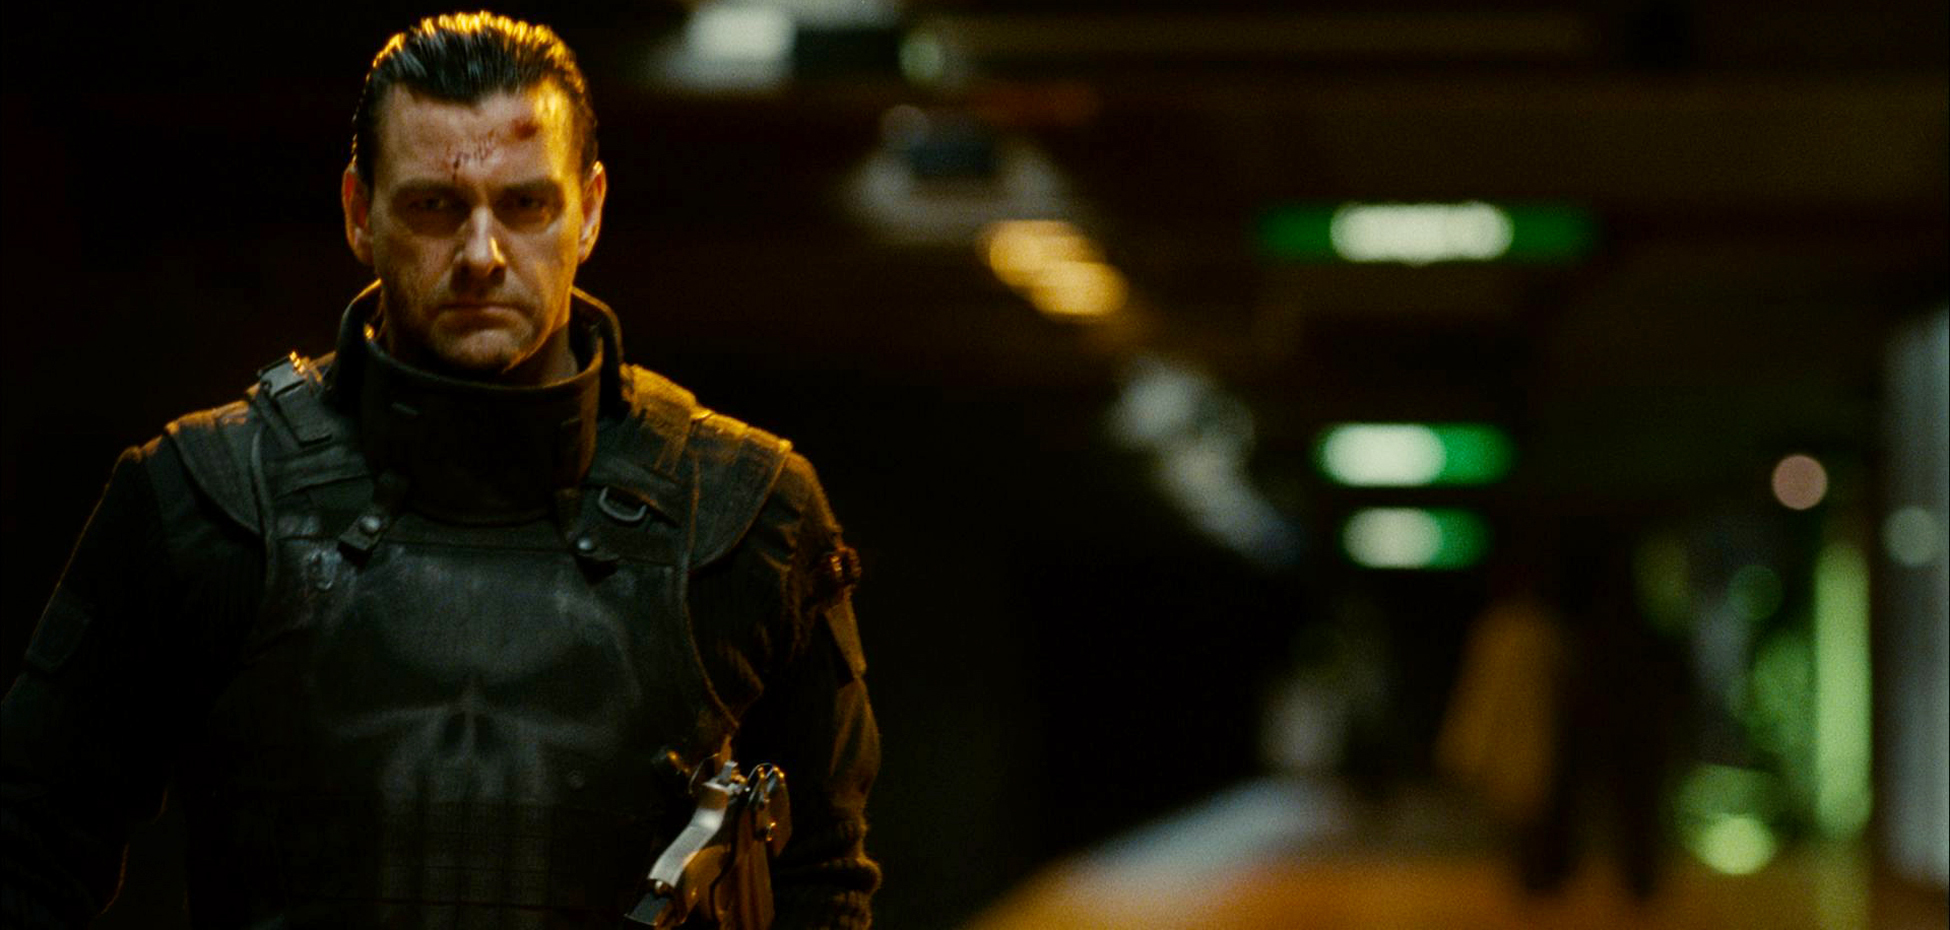  Ray Stevenson stars as Frank Castle -- a/k/a The Punisher -- in PUNISHER: WAR ZONE, directed by Lexi Alexander. Photo credit: Lionsgate.